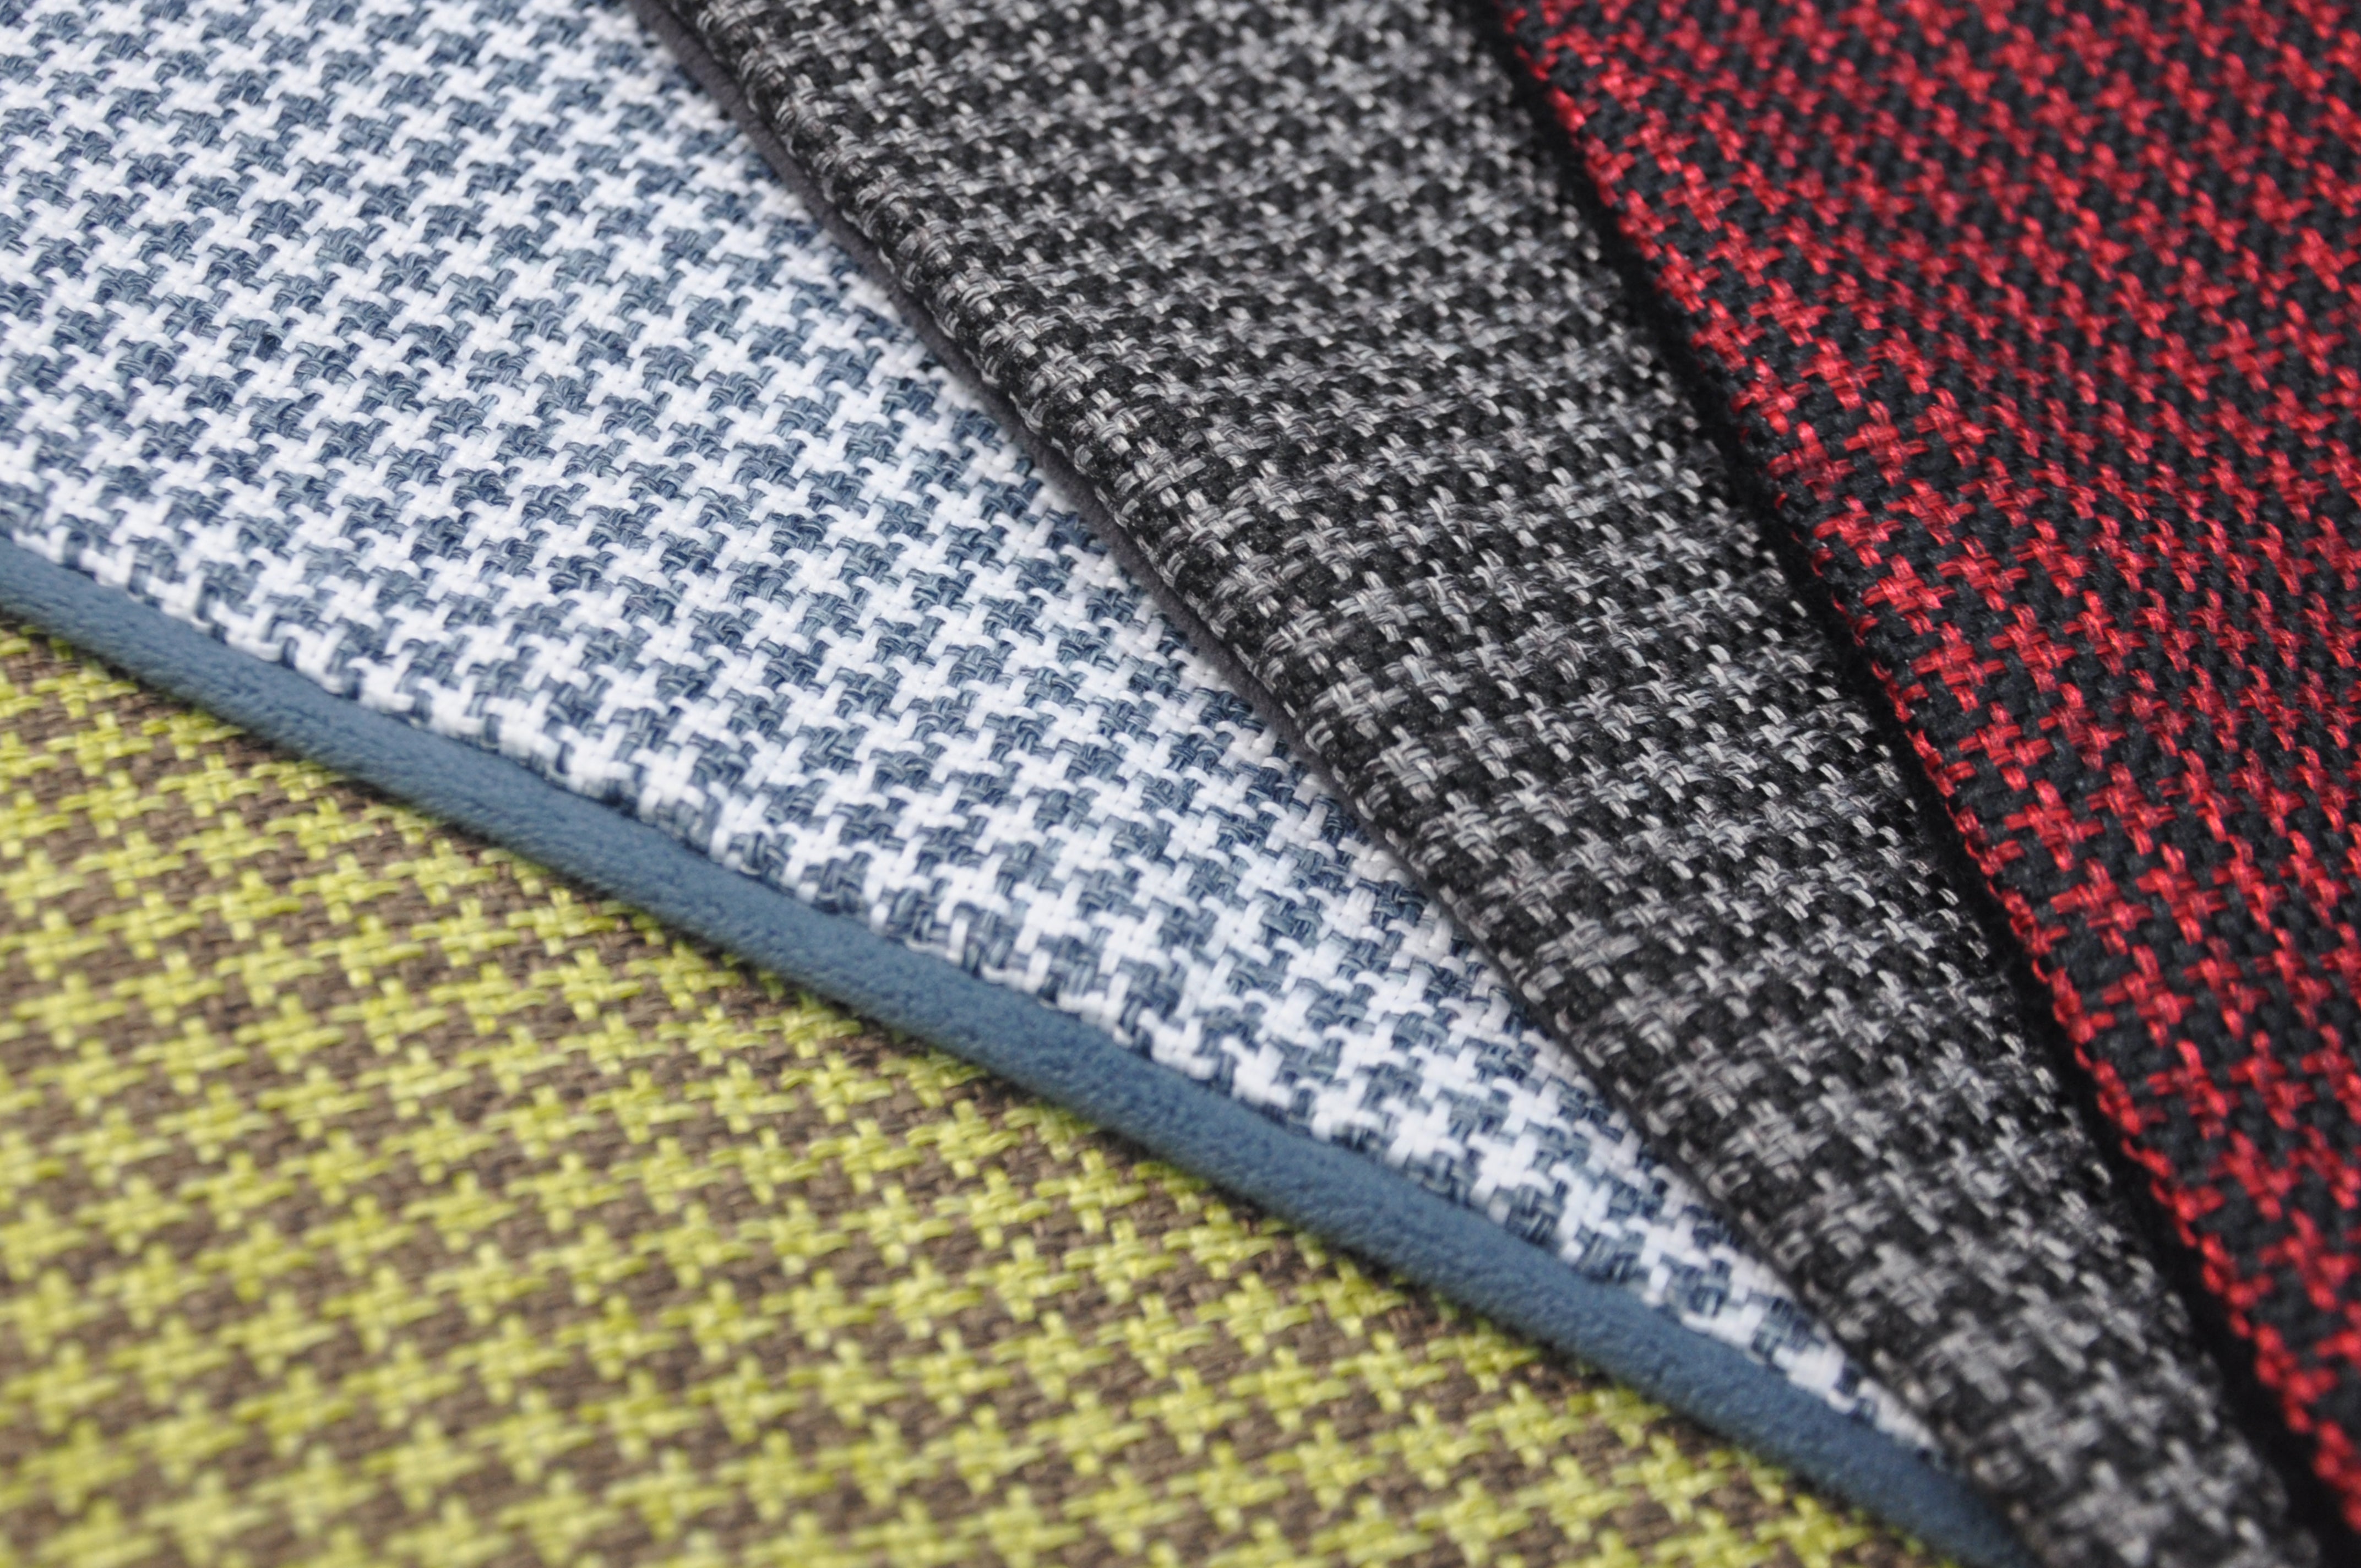 [Pre-order]Lounge Dog Bed: Houndstooth Cayenne Red